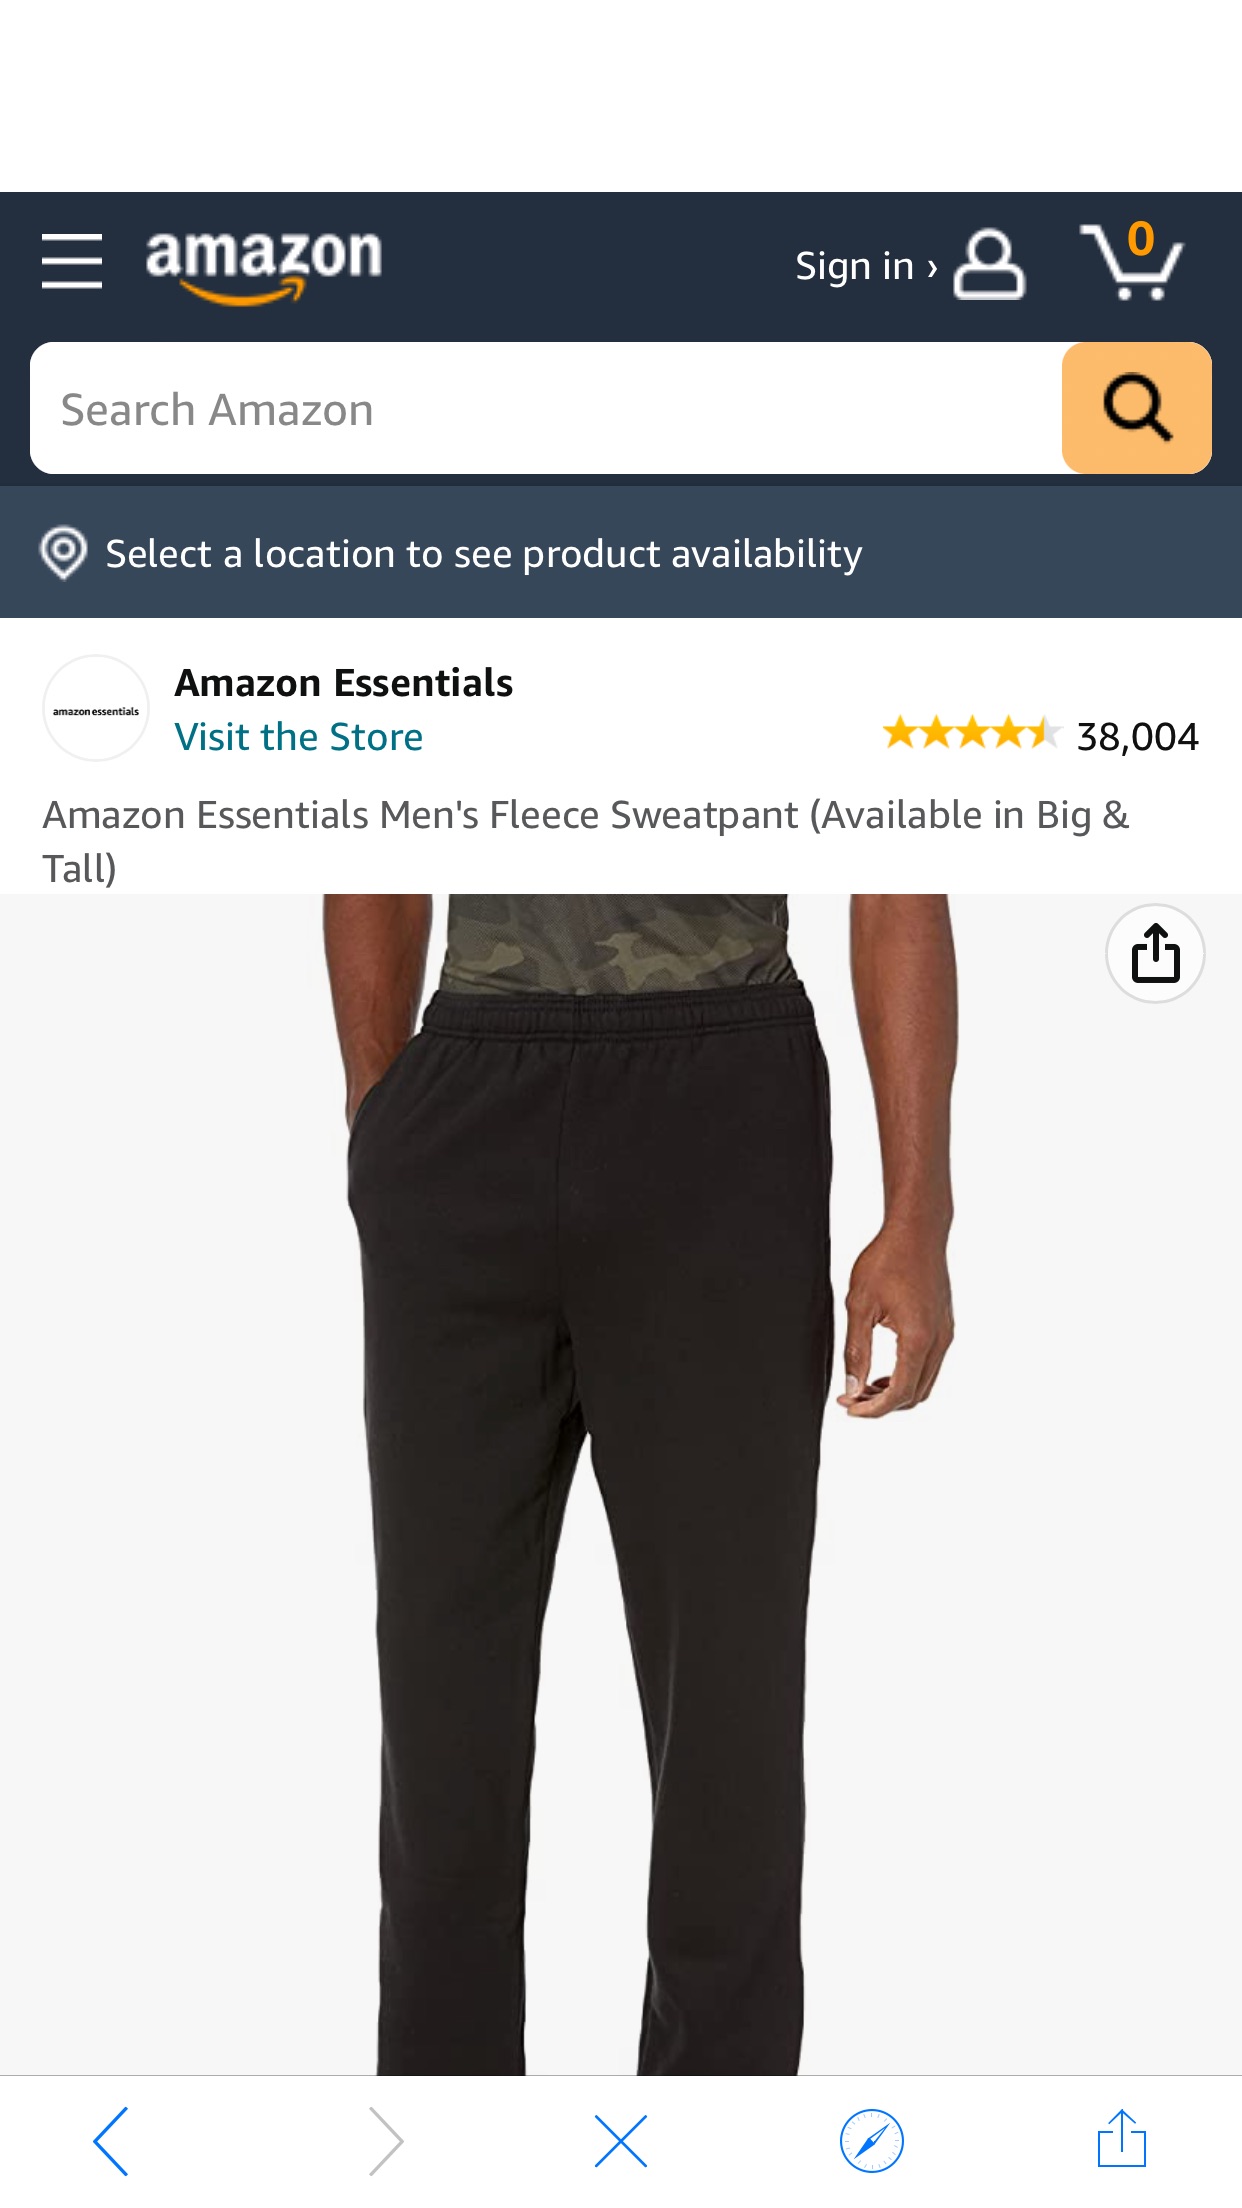 Amazon.com: Amazon Essentials Men's Fleece Sweatpant (Available in Big & Tall), Black, X-Large : Clothing, Shoes & Jewelry裤子